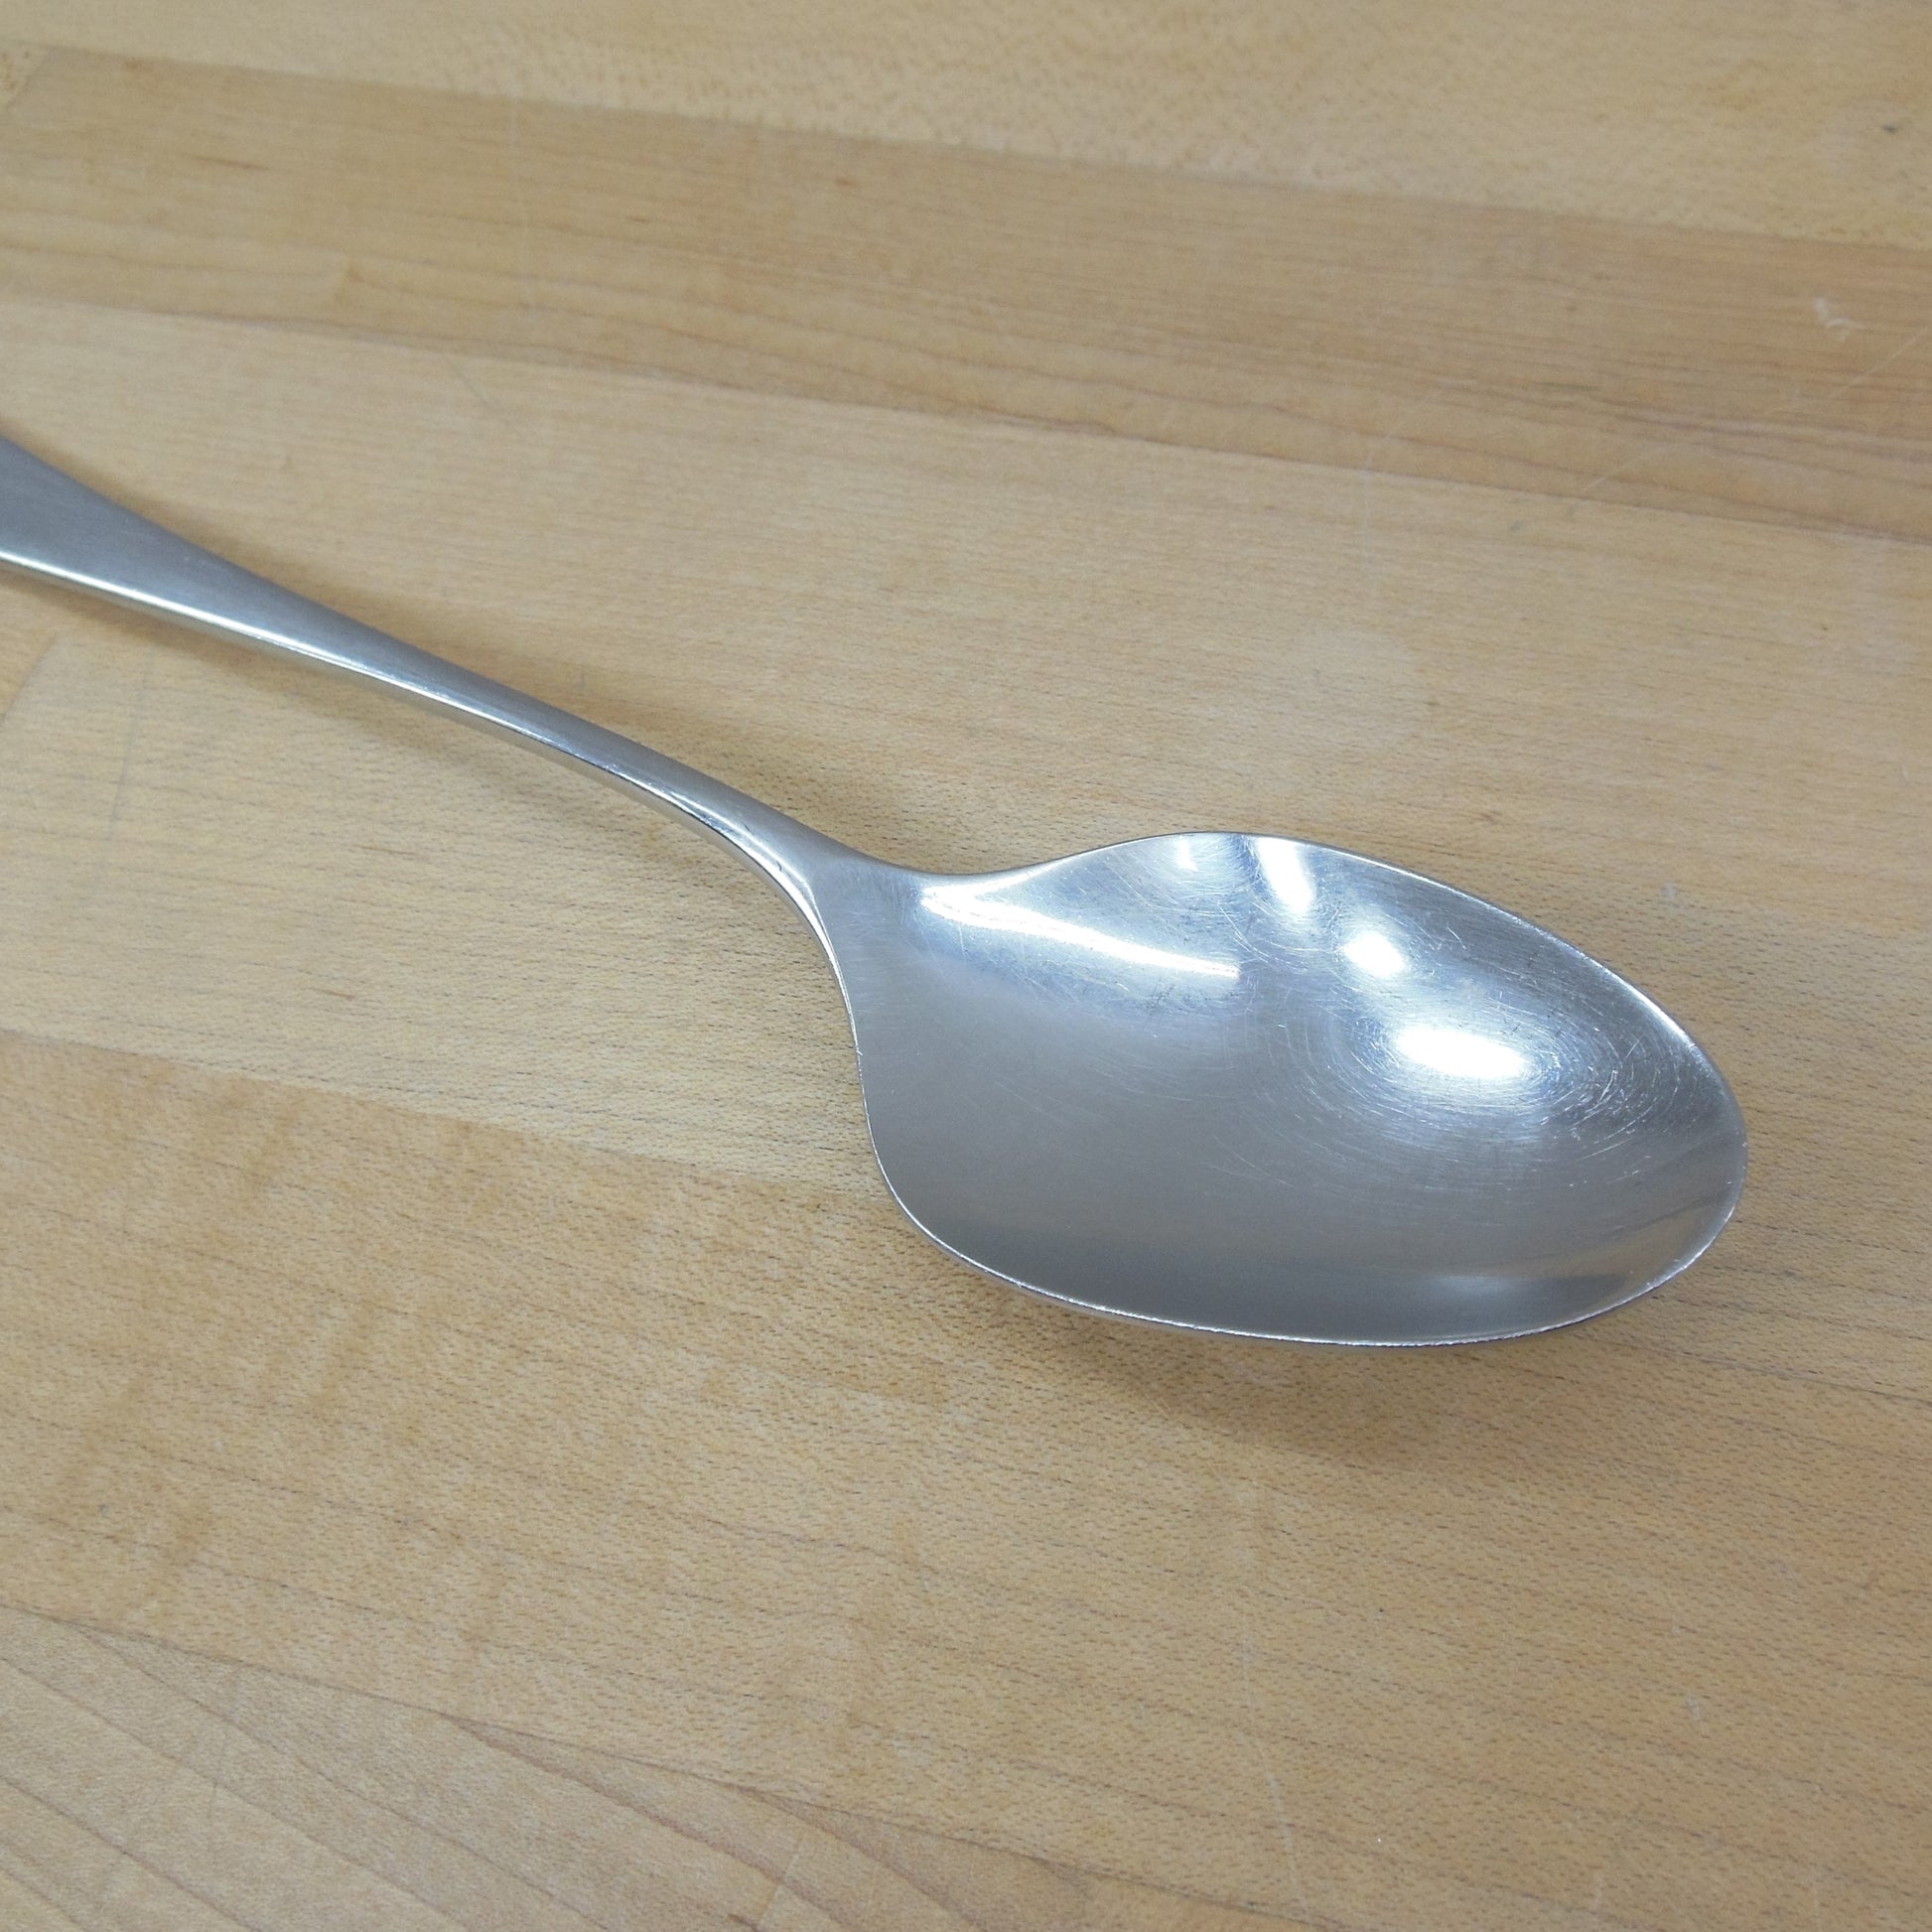 WMF Germany Cromargan Stainless Finesse Flatware - Table Serving Spoon Vintage